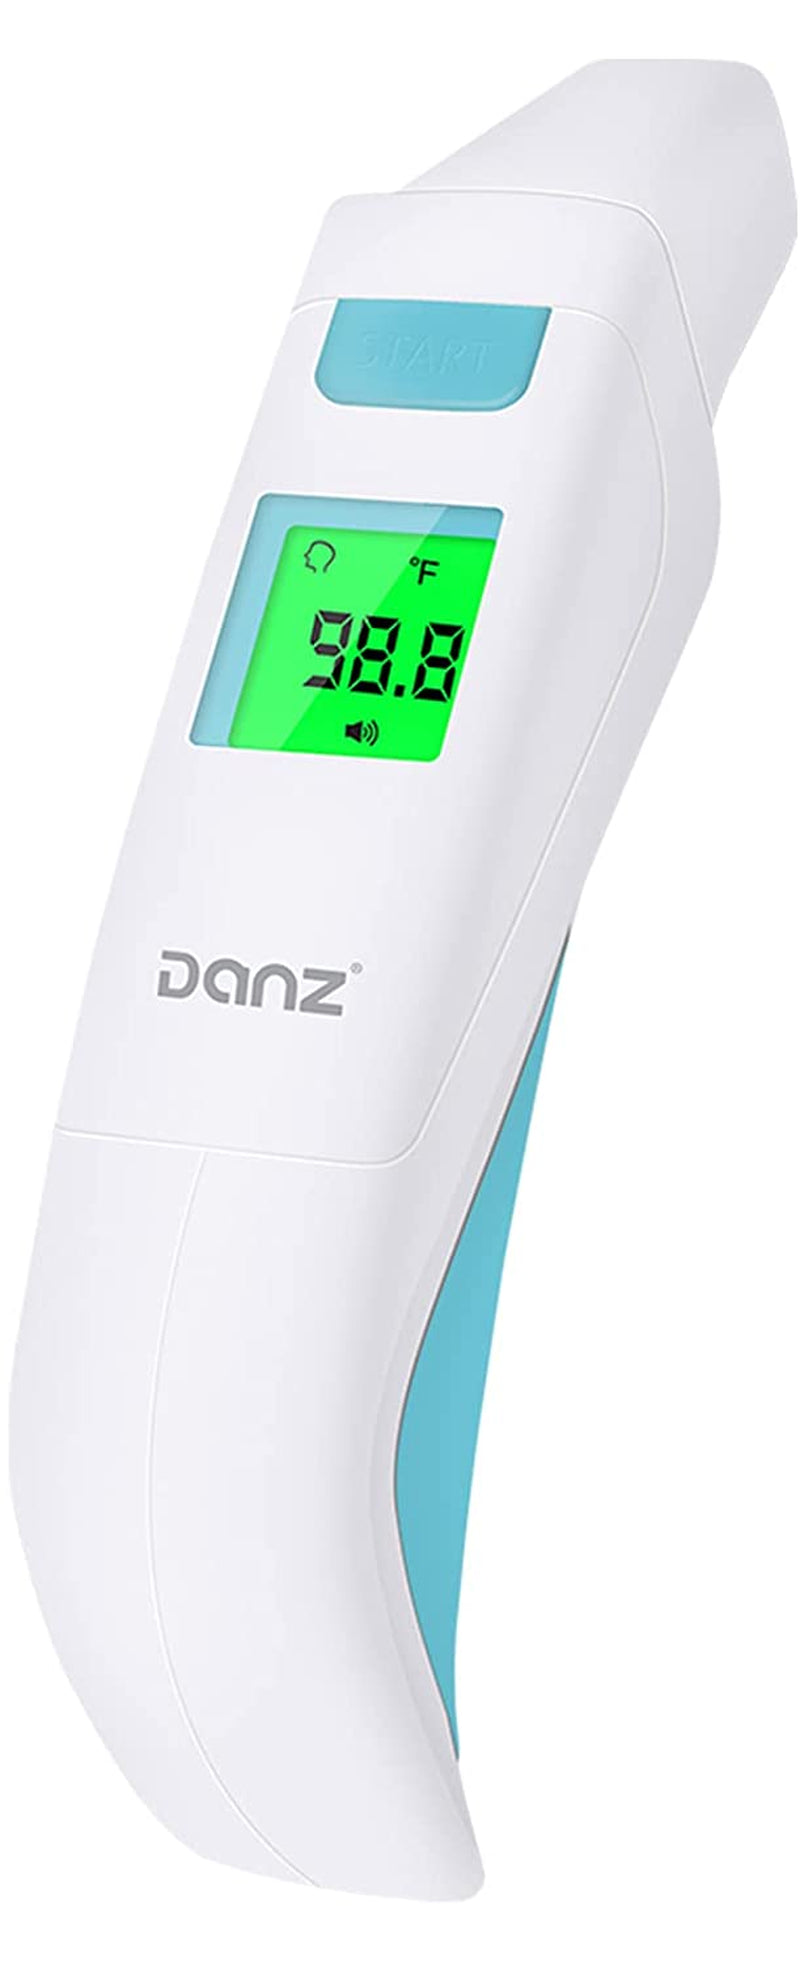 Ear Thermometer for Adult and Kids, Forehead and Ear Thermometer, Baby Ear Thermometer, in Ear Thermometer,Digital Ear Thermometer, Fever Alarm, Fast Reading